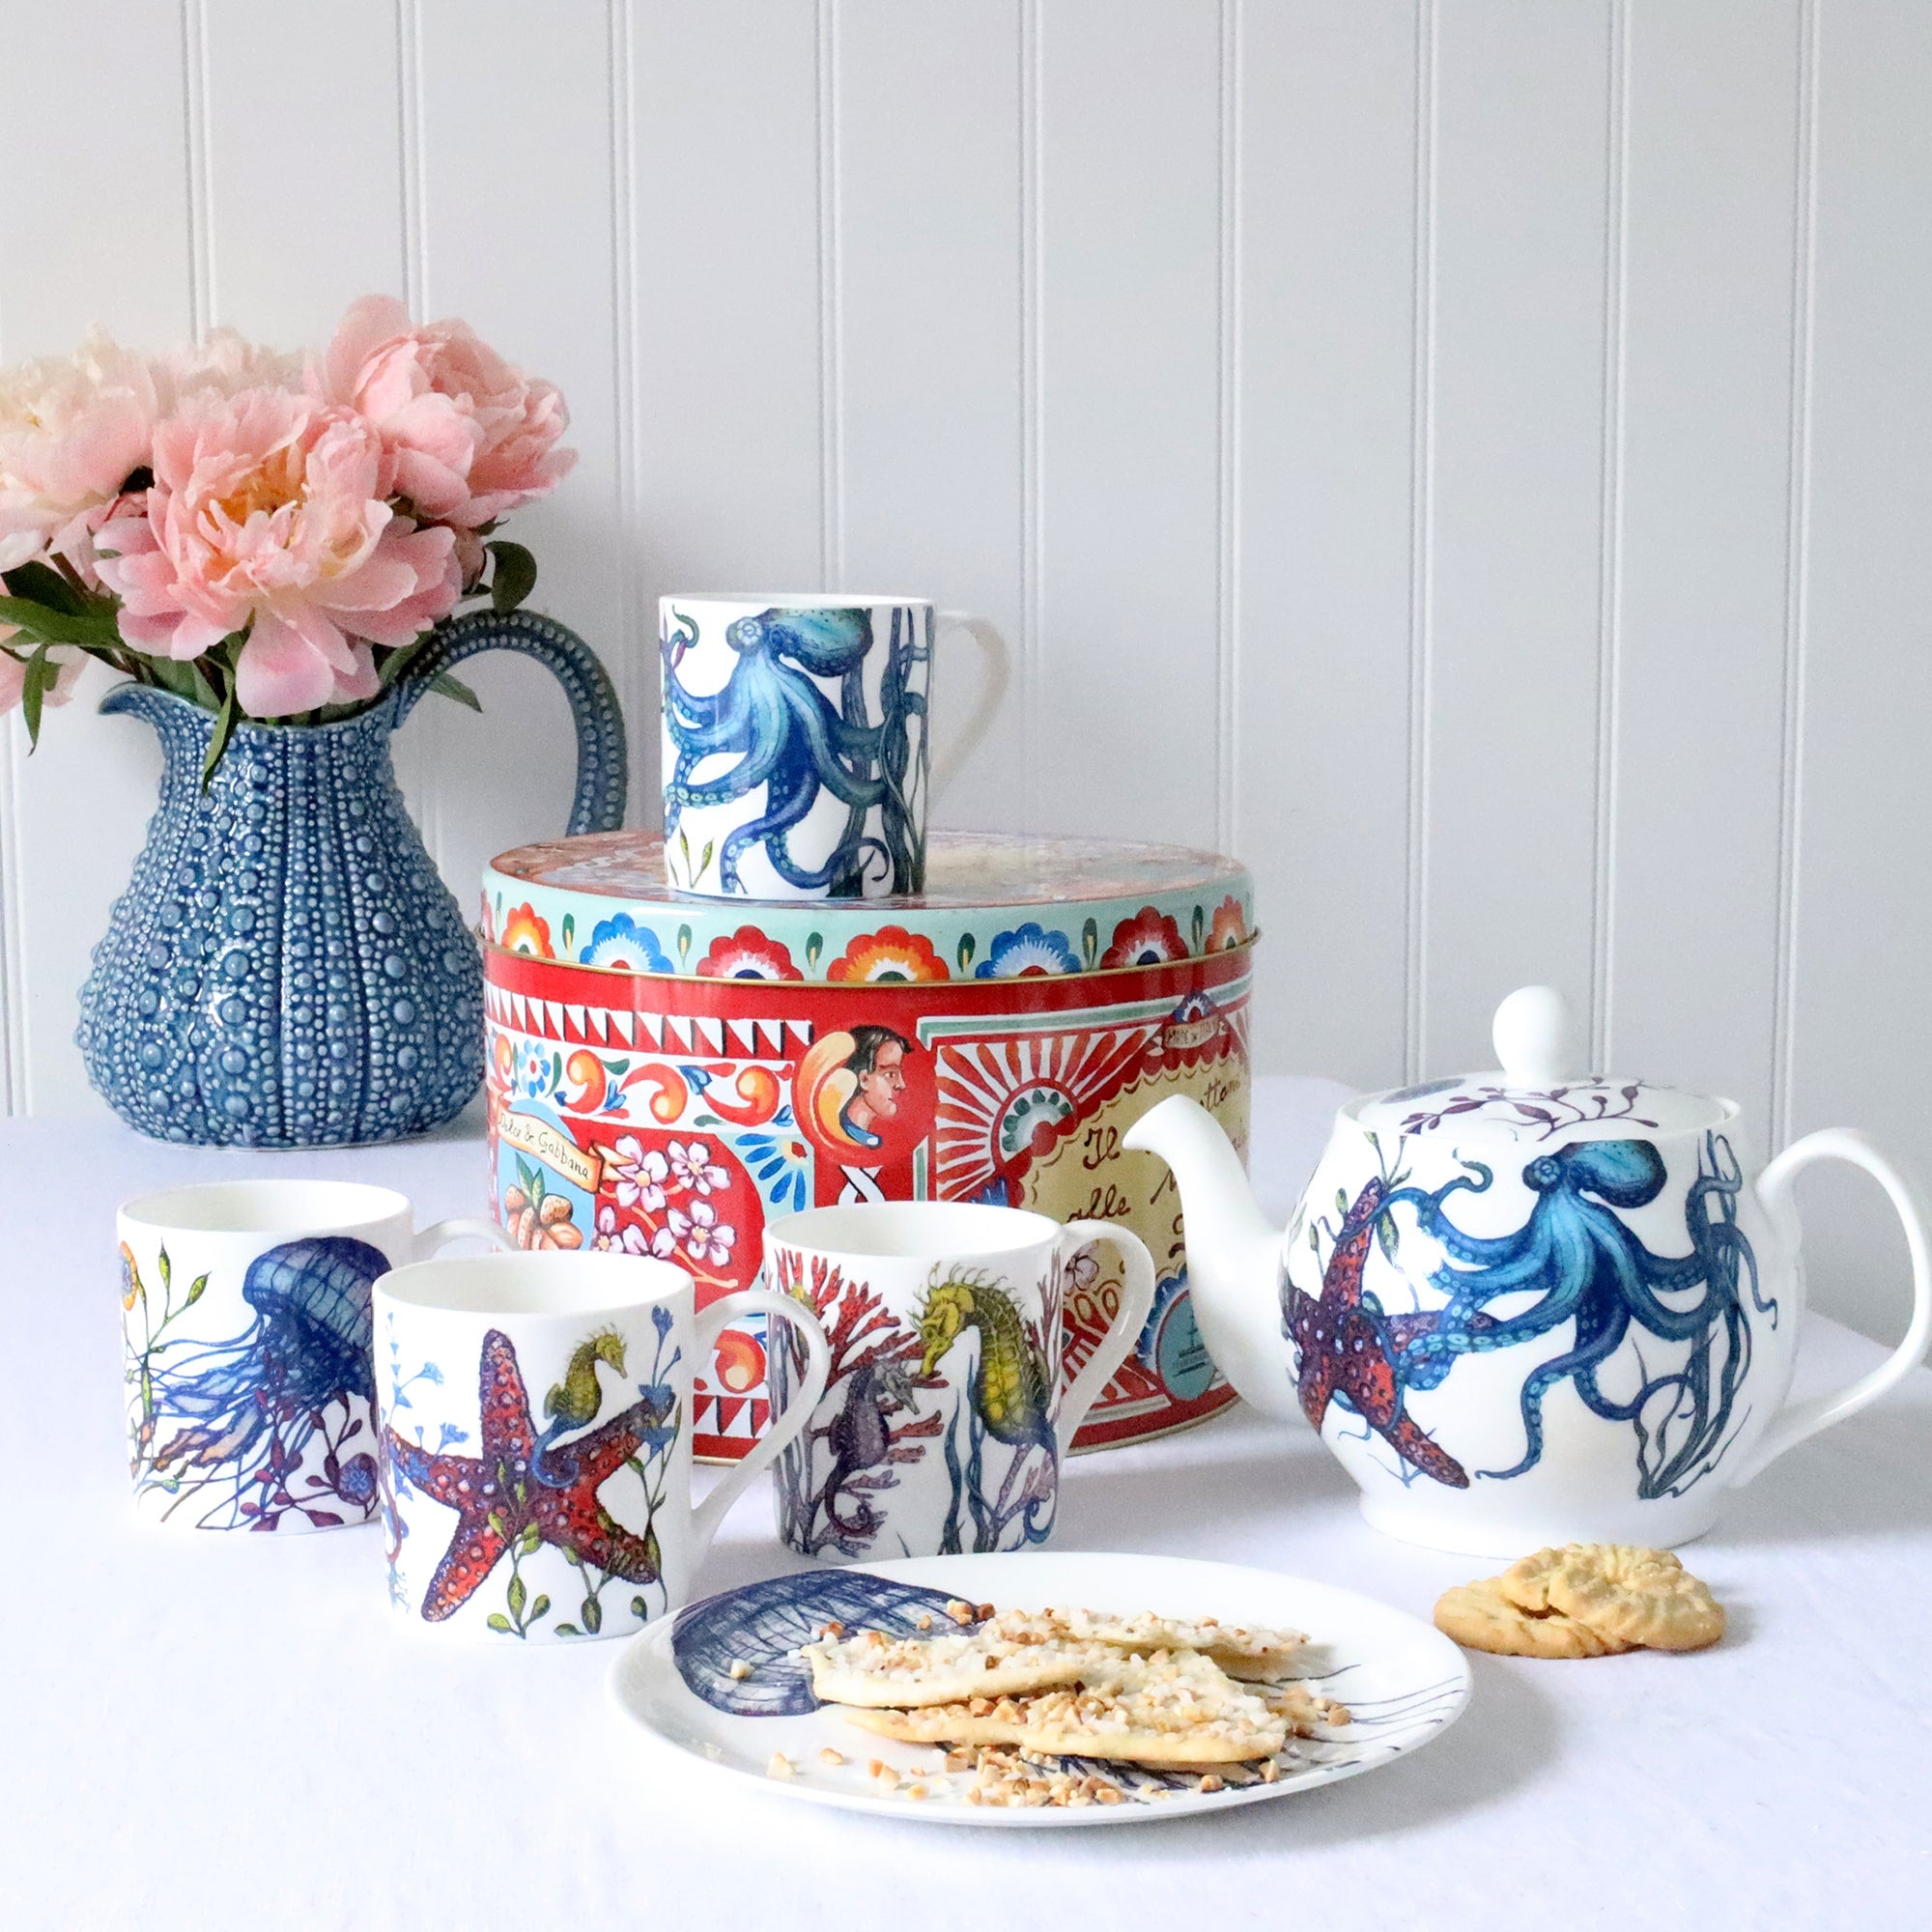 Set of four Bone china white mugs featuring hand drawn Reef designs stacked showing each design.One Starfish,Octopus,Seahorse and a Jellyfish in our bright reef colours on a white table setting with urchin jug, flowers and panettone tin.